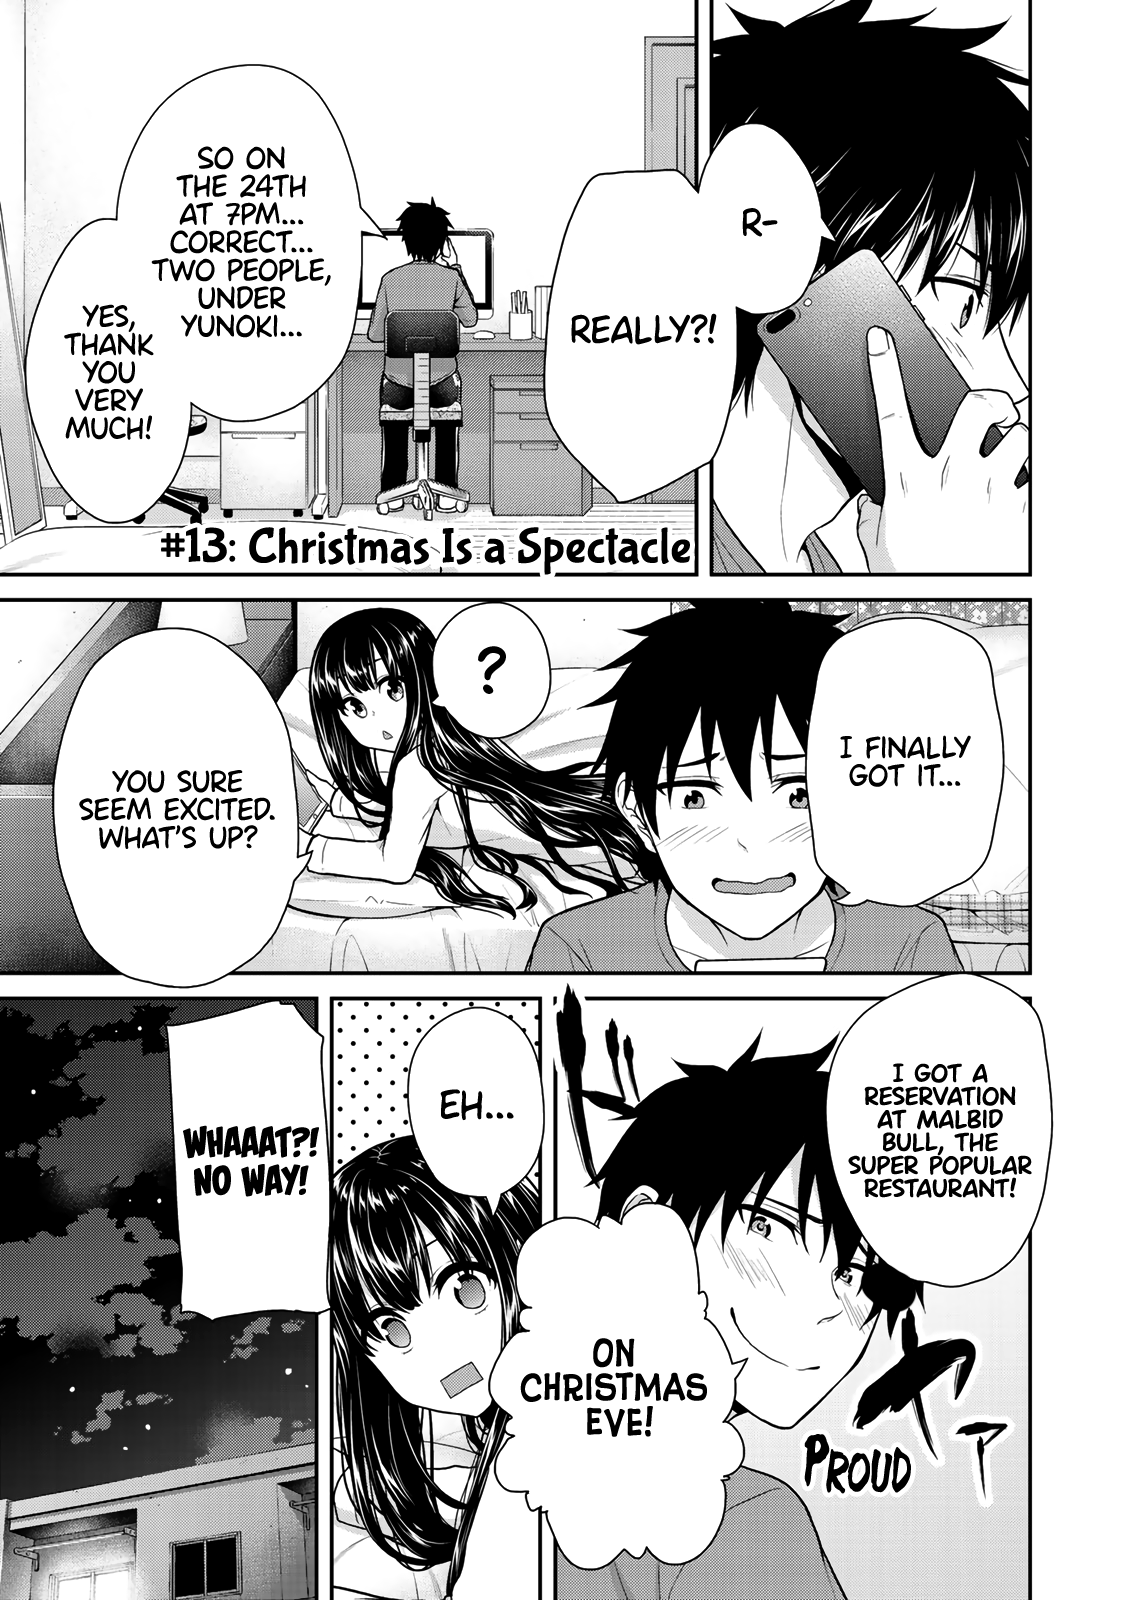 Fechippuru ~Our Innocent Love~ Vol.2 Chapter 13: Christmas Is A Spectacle - Picture 1